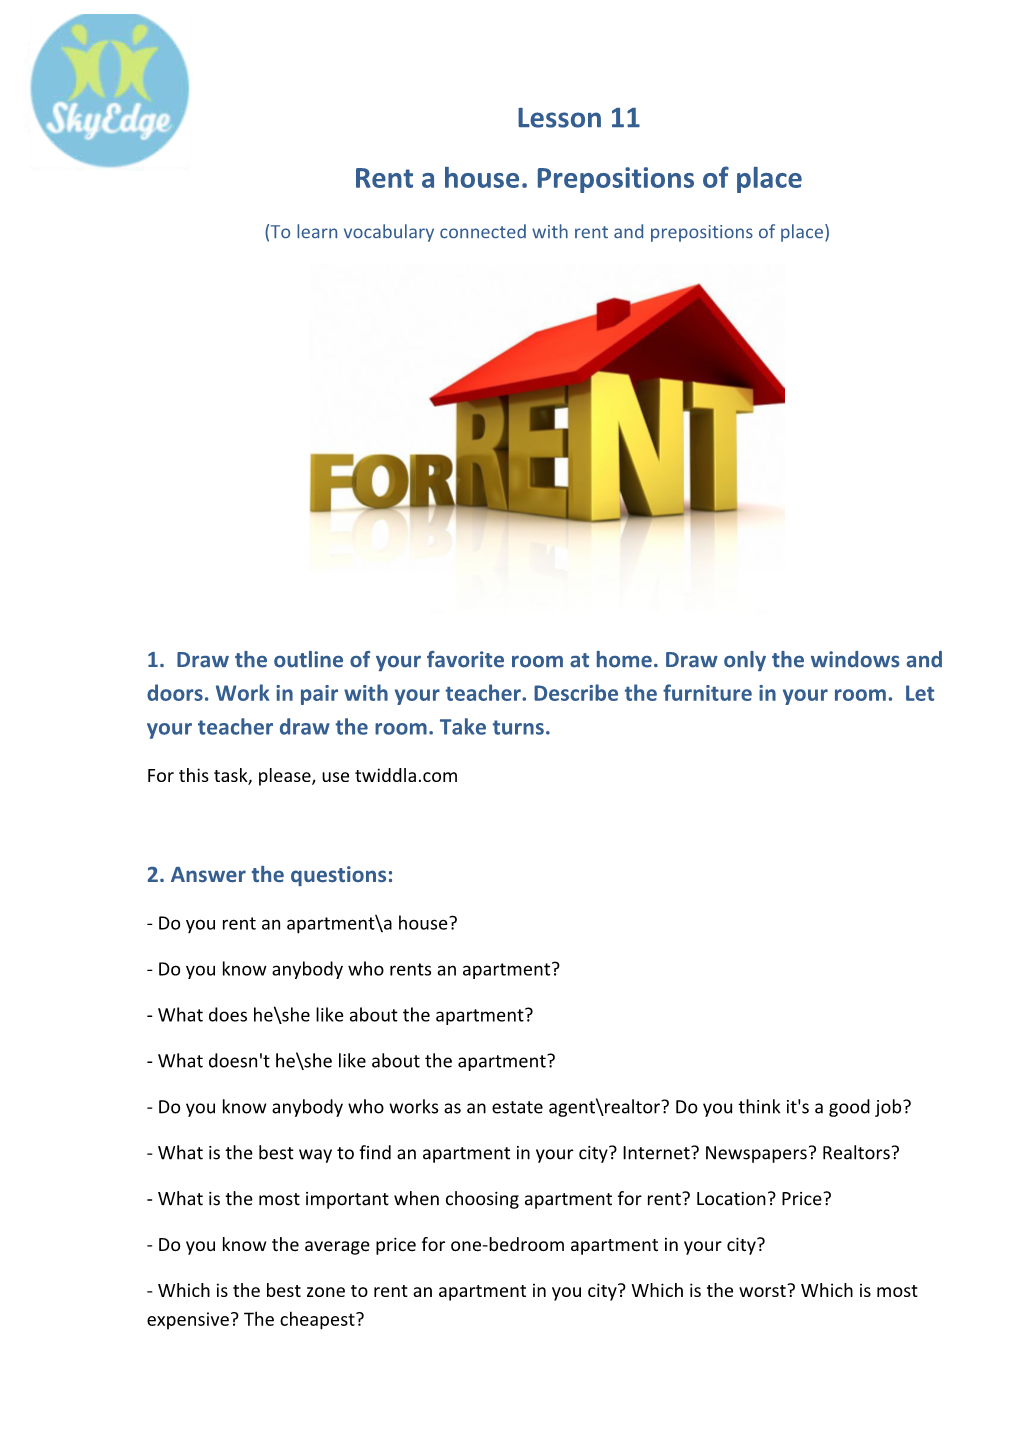 Rent a House. Prepositions of Place